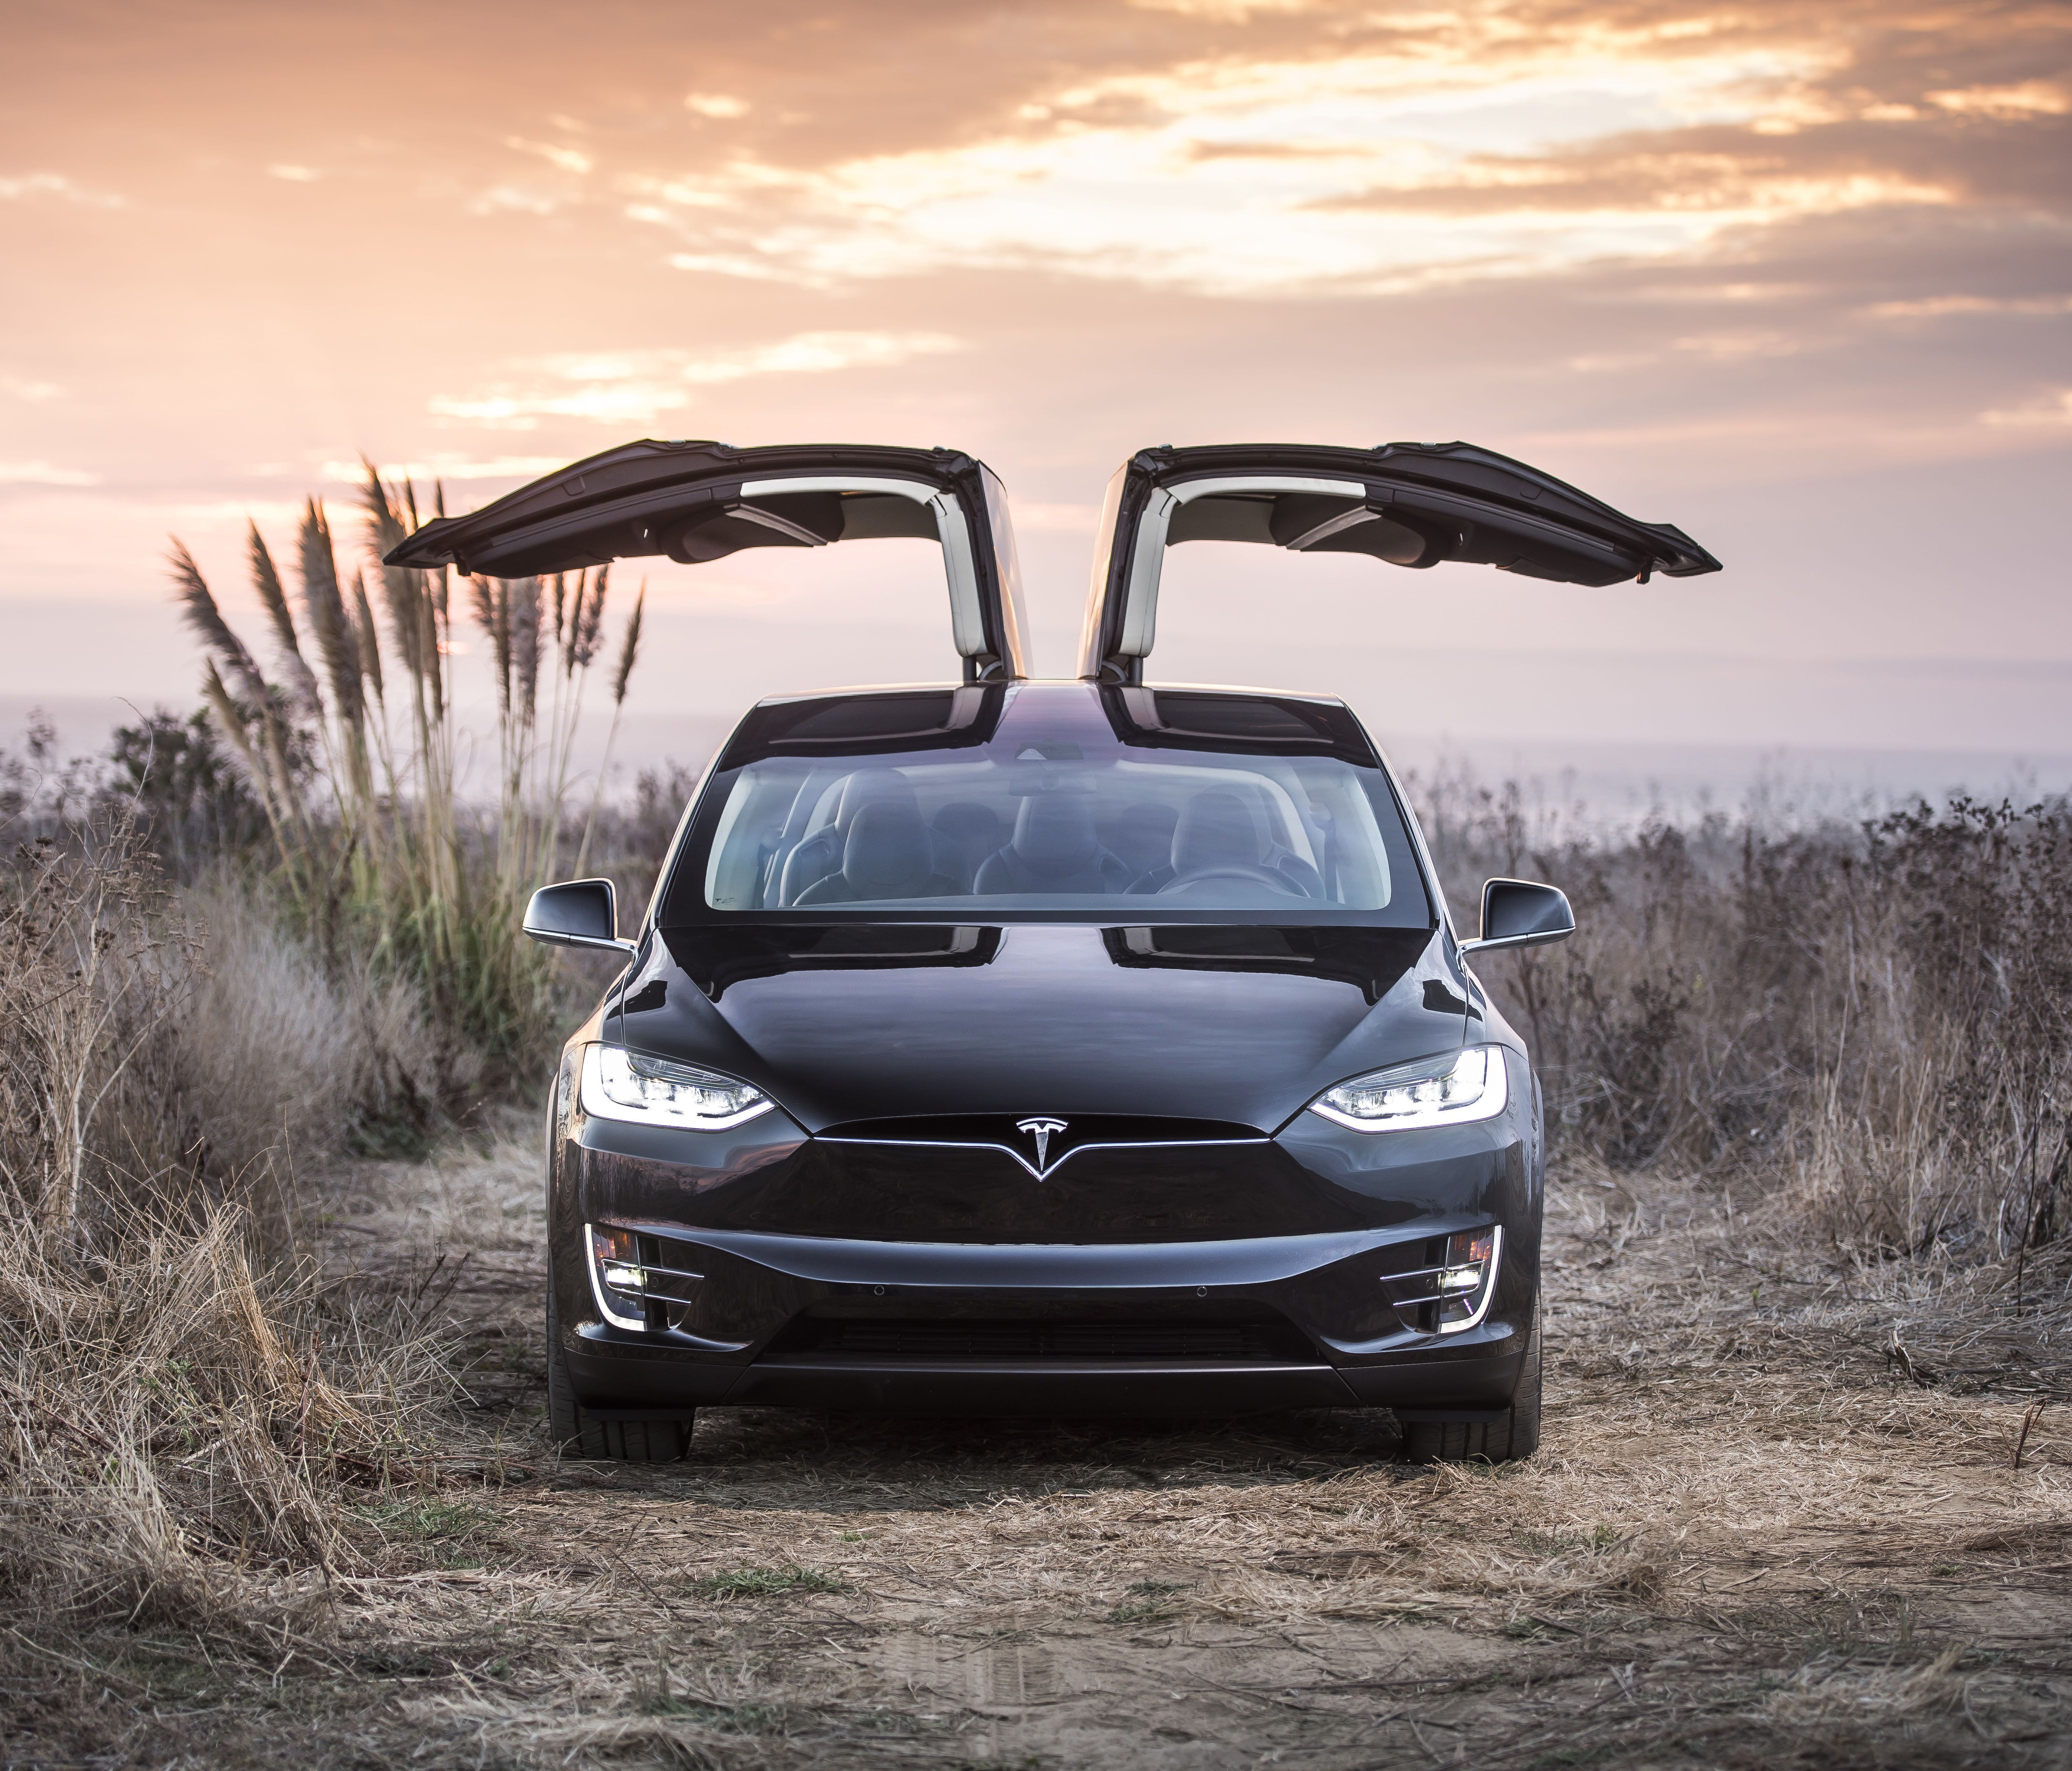 Tesla's Model X has earned top safety marks from the government